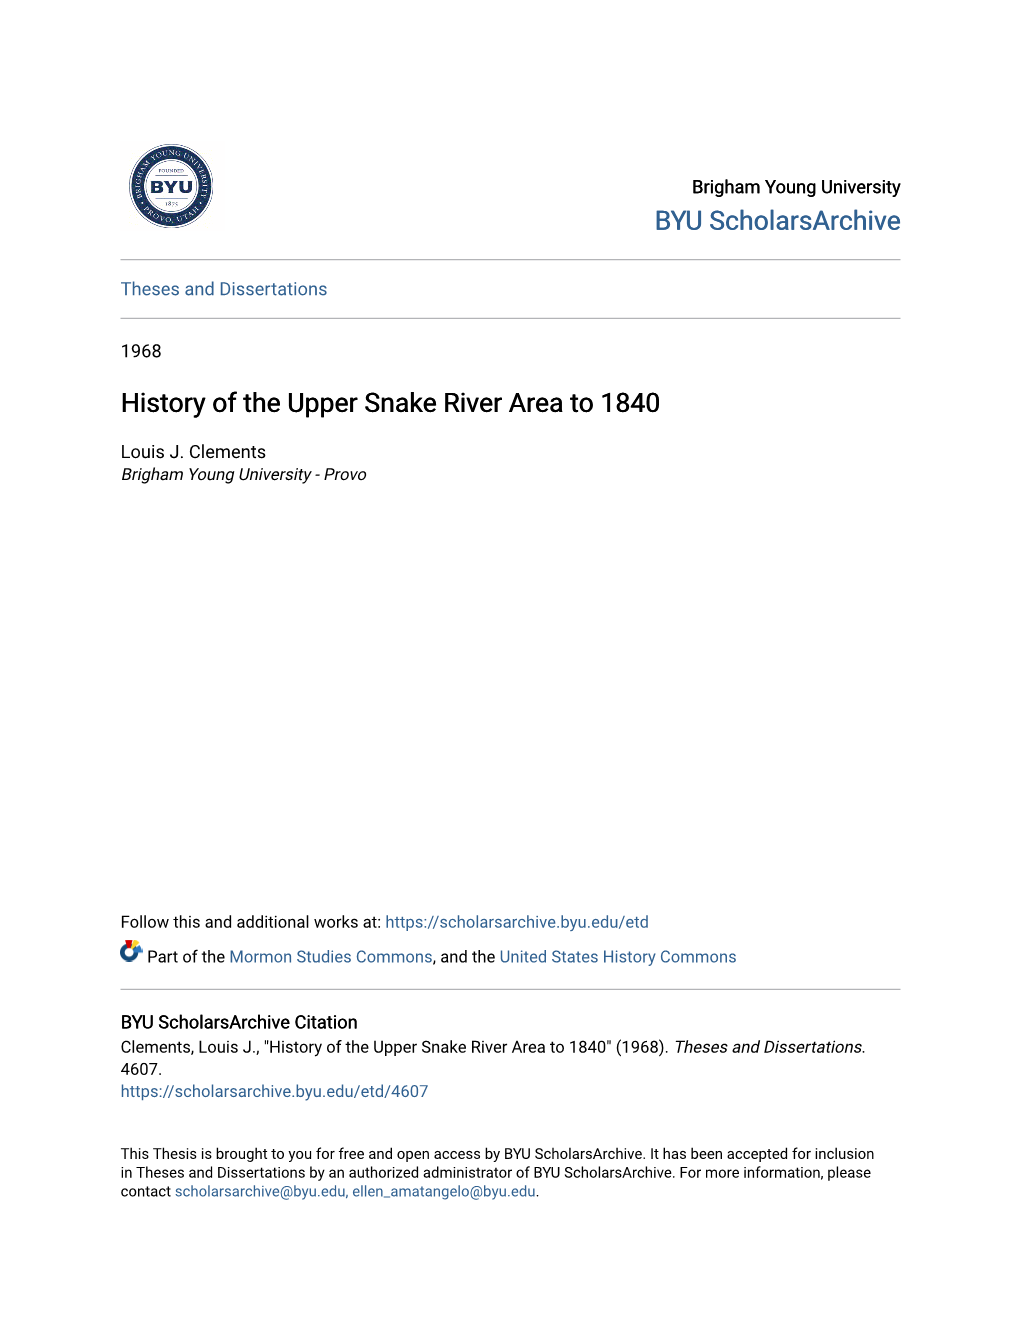 History of the Upper Snake River Area to 1840